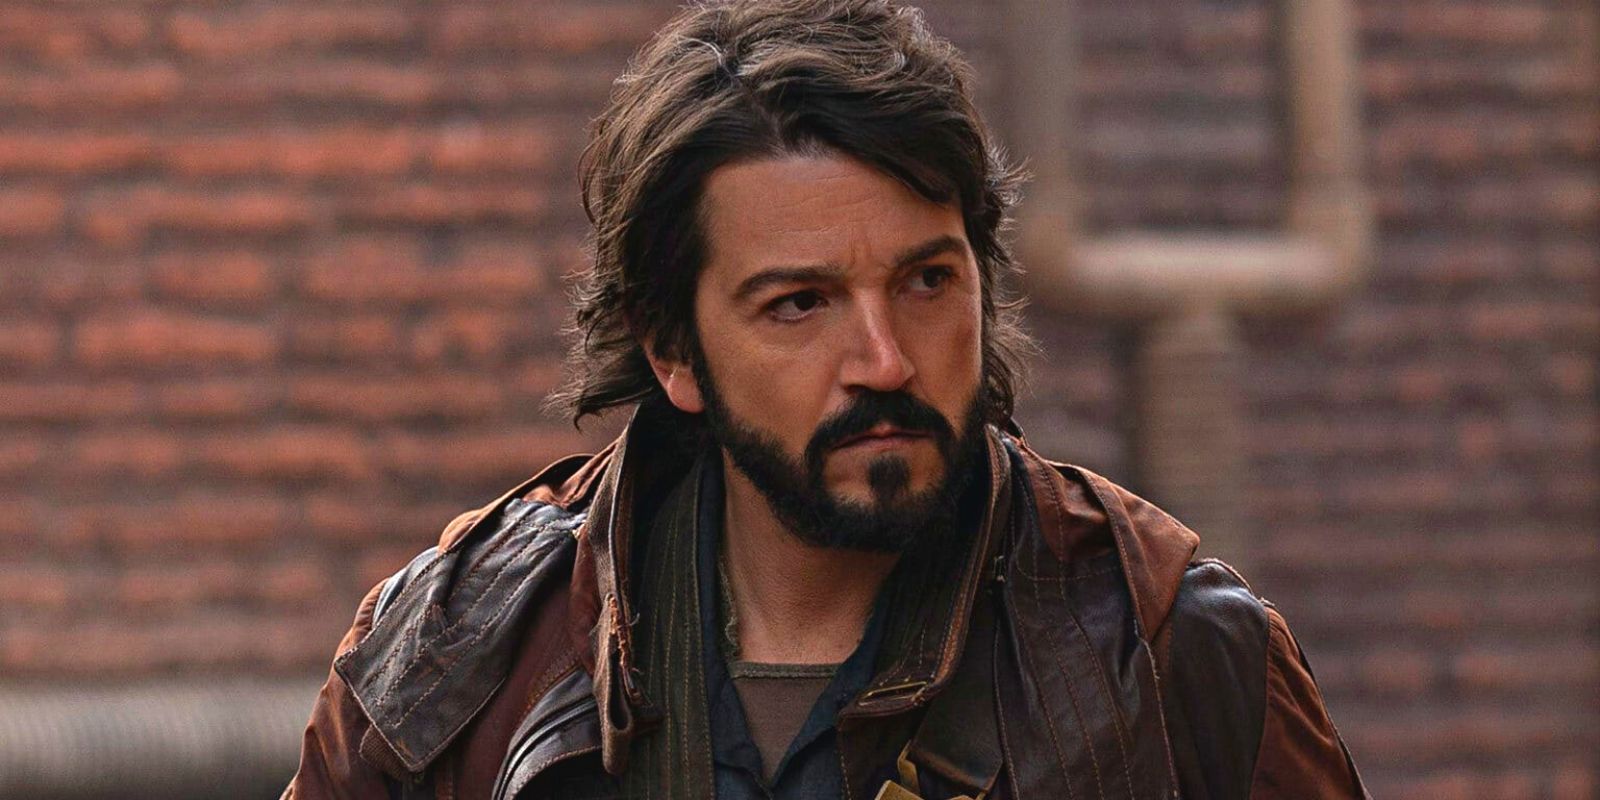 Cassian Andor looking to the right in front of a brick wall